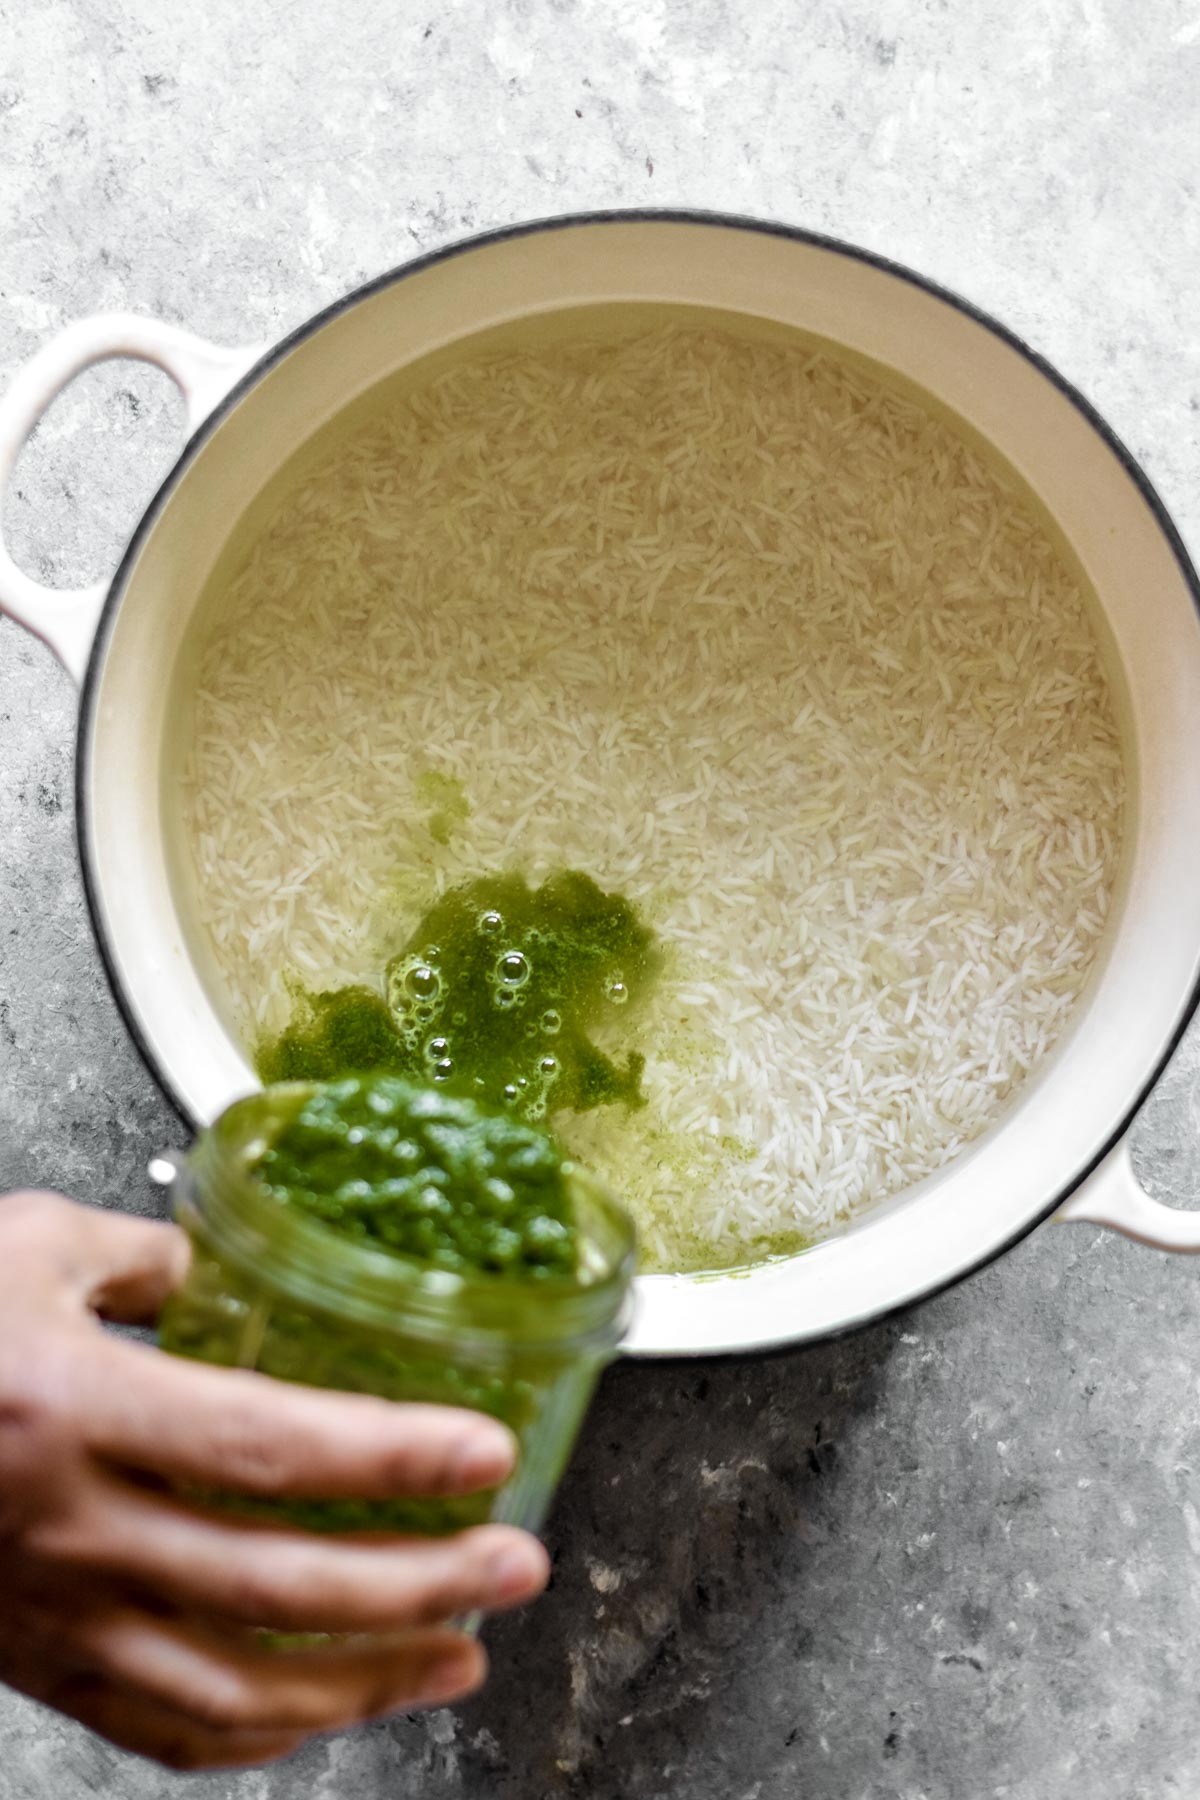 blended green sauce being poured into washed rice